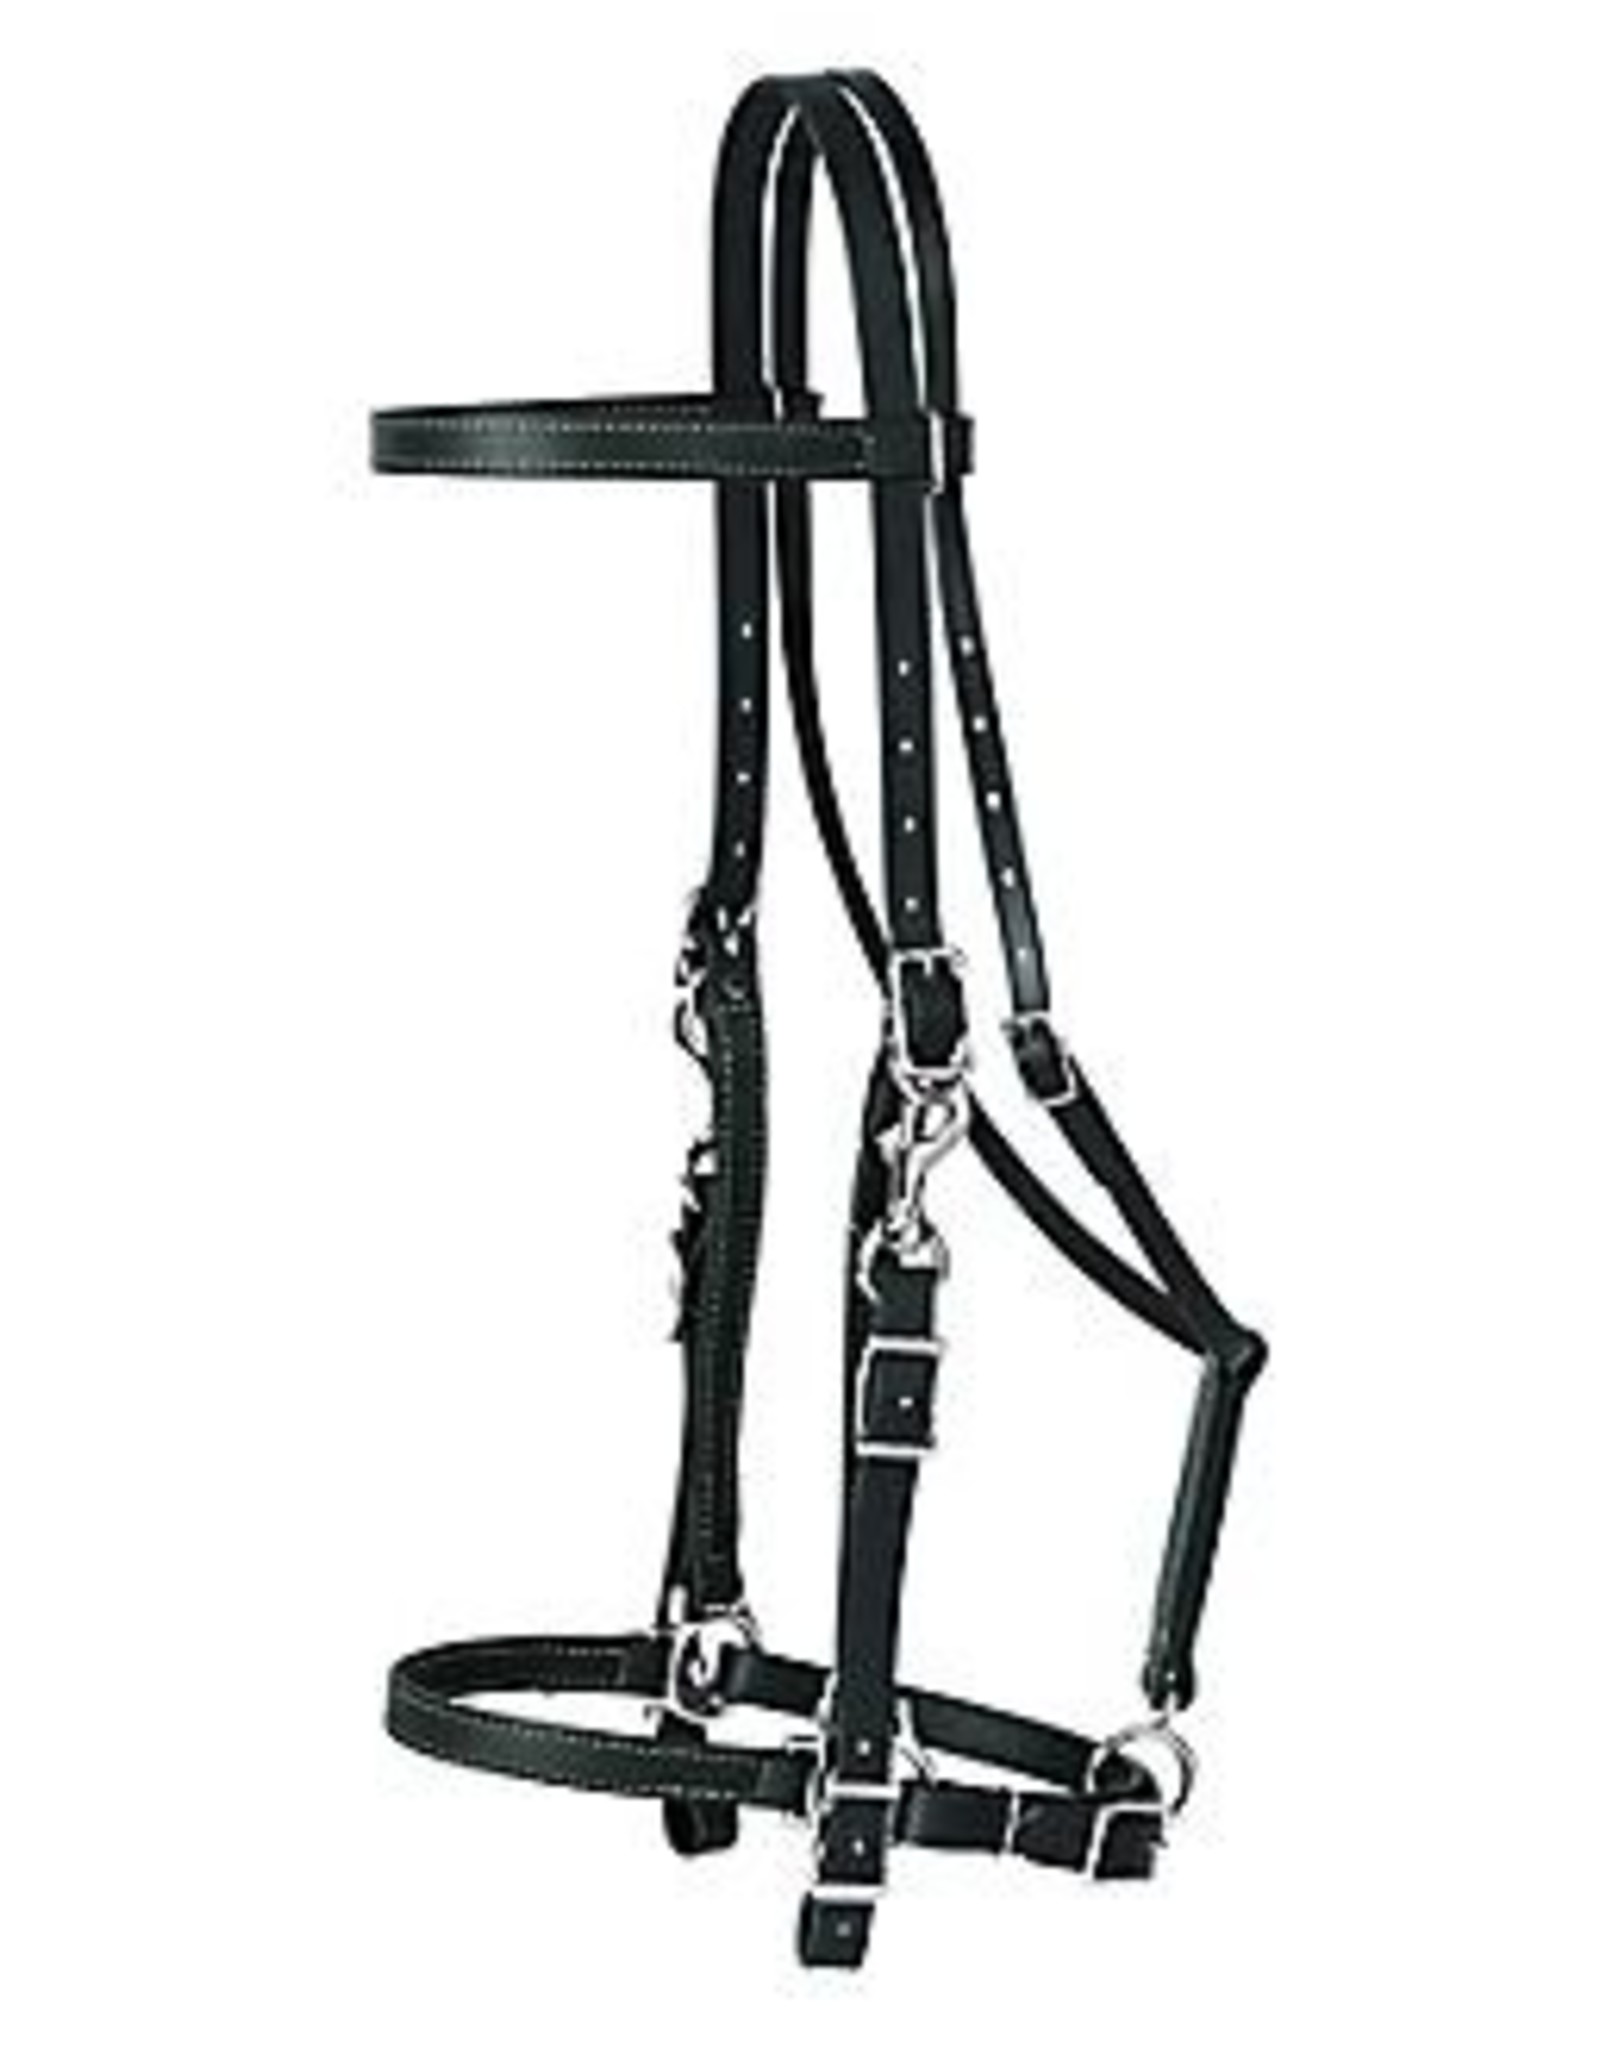 Weaver Leather Trail Gear Halter/Bridle Combo